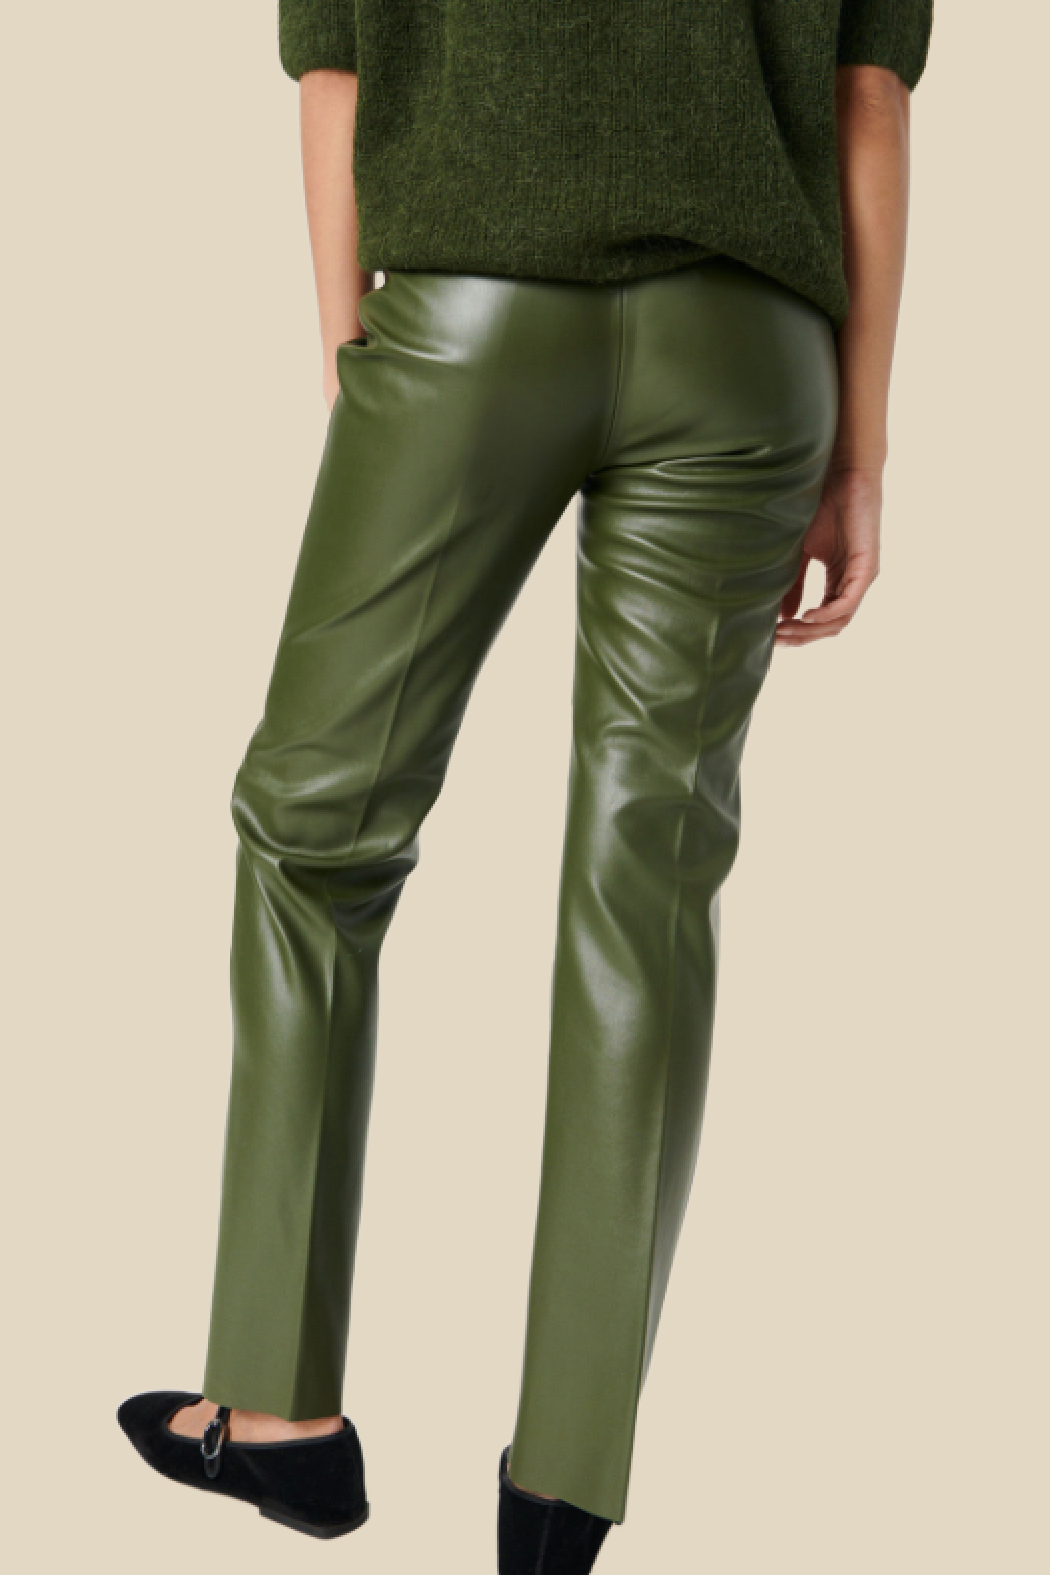 Kaylee Straight Faux Leather Pants